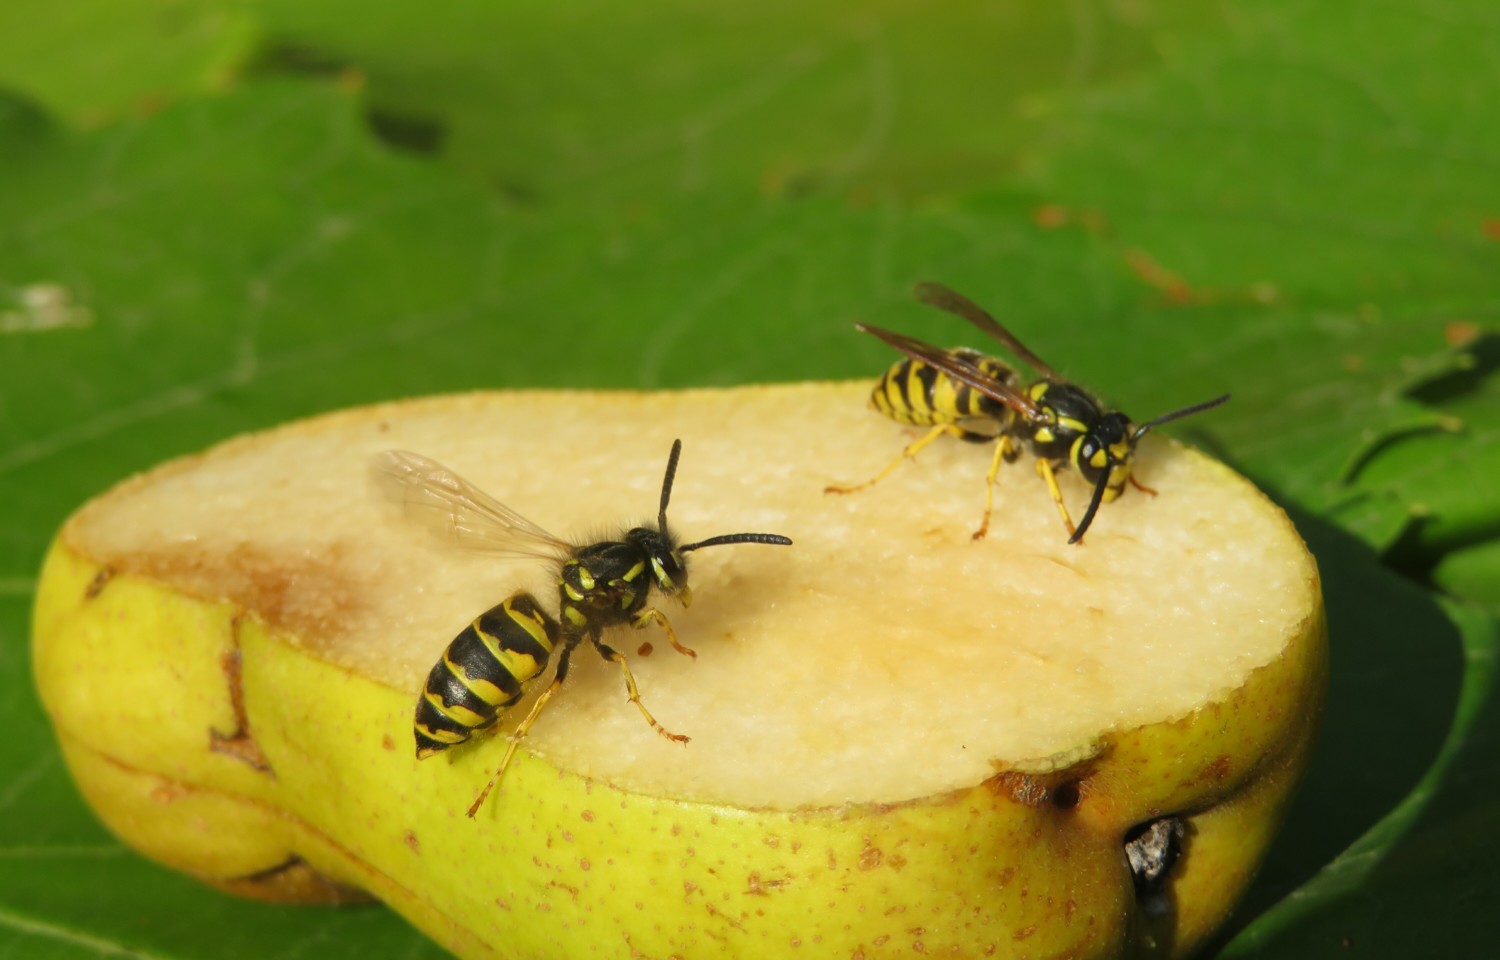 European wasps eating pear in the garden